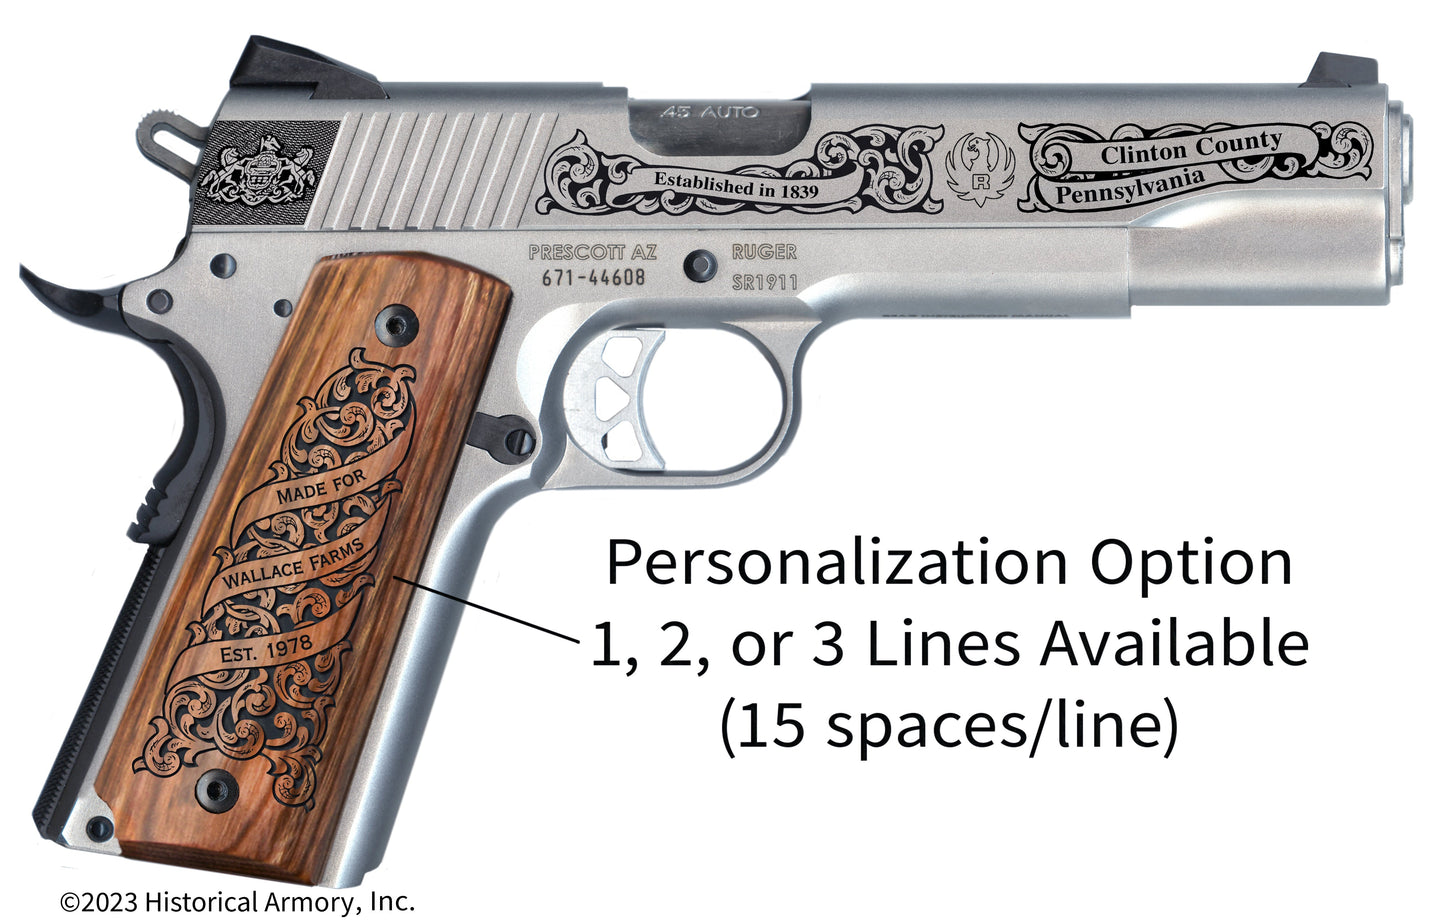 Clinton County Pennsylvania Personalized Engraved .45 Auto Ruger 1911